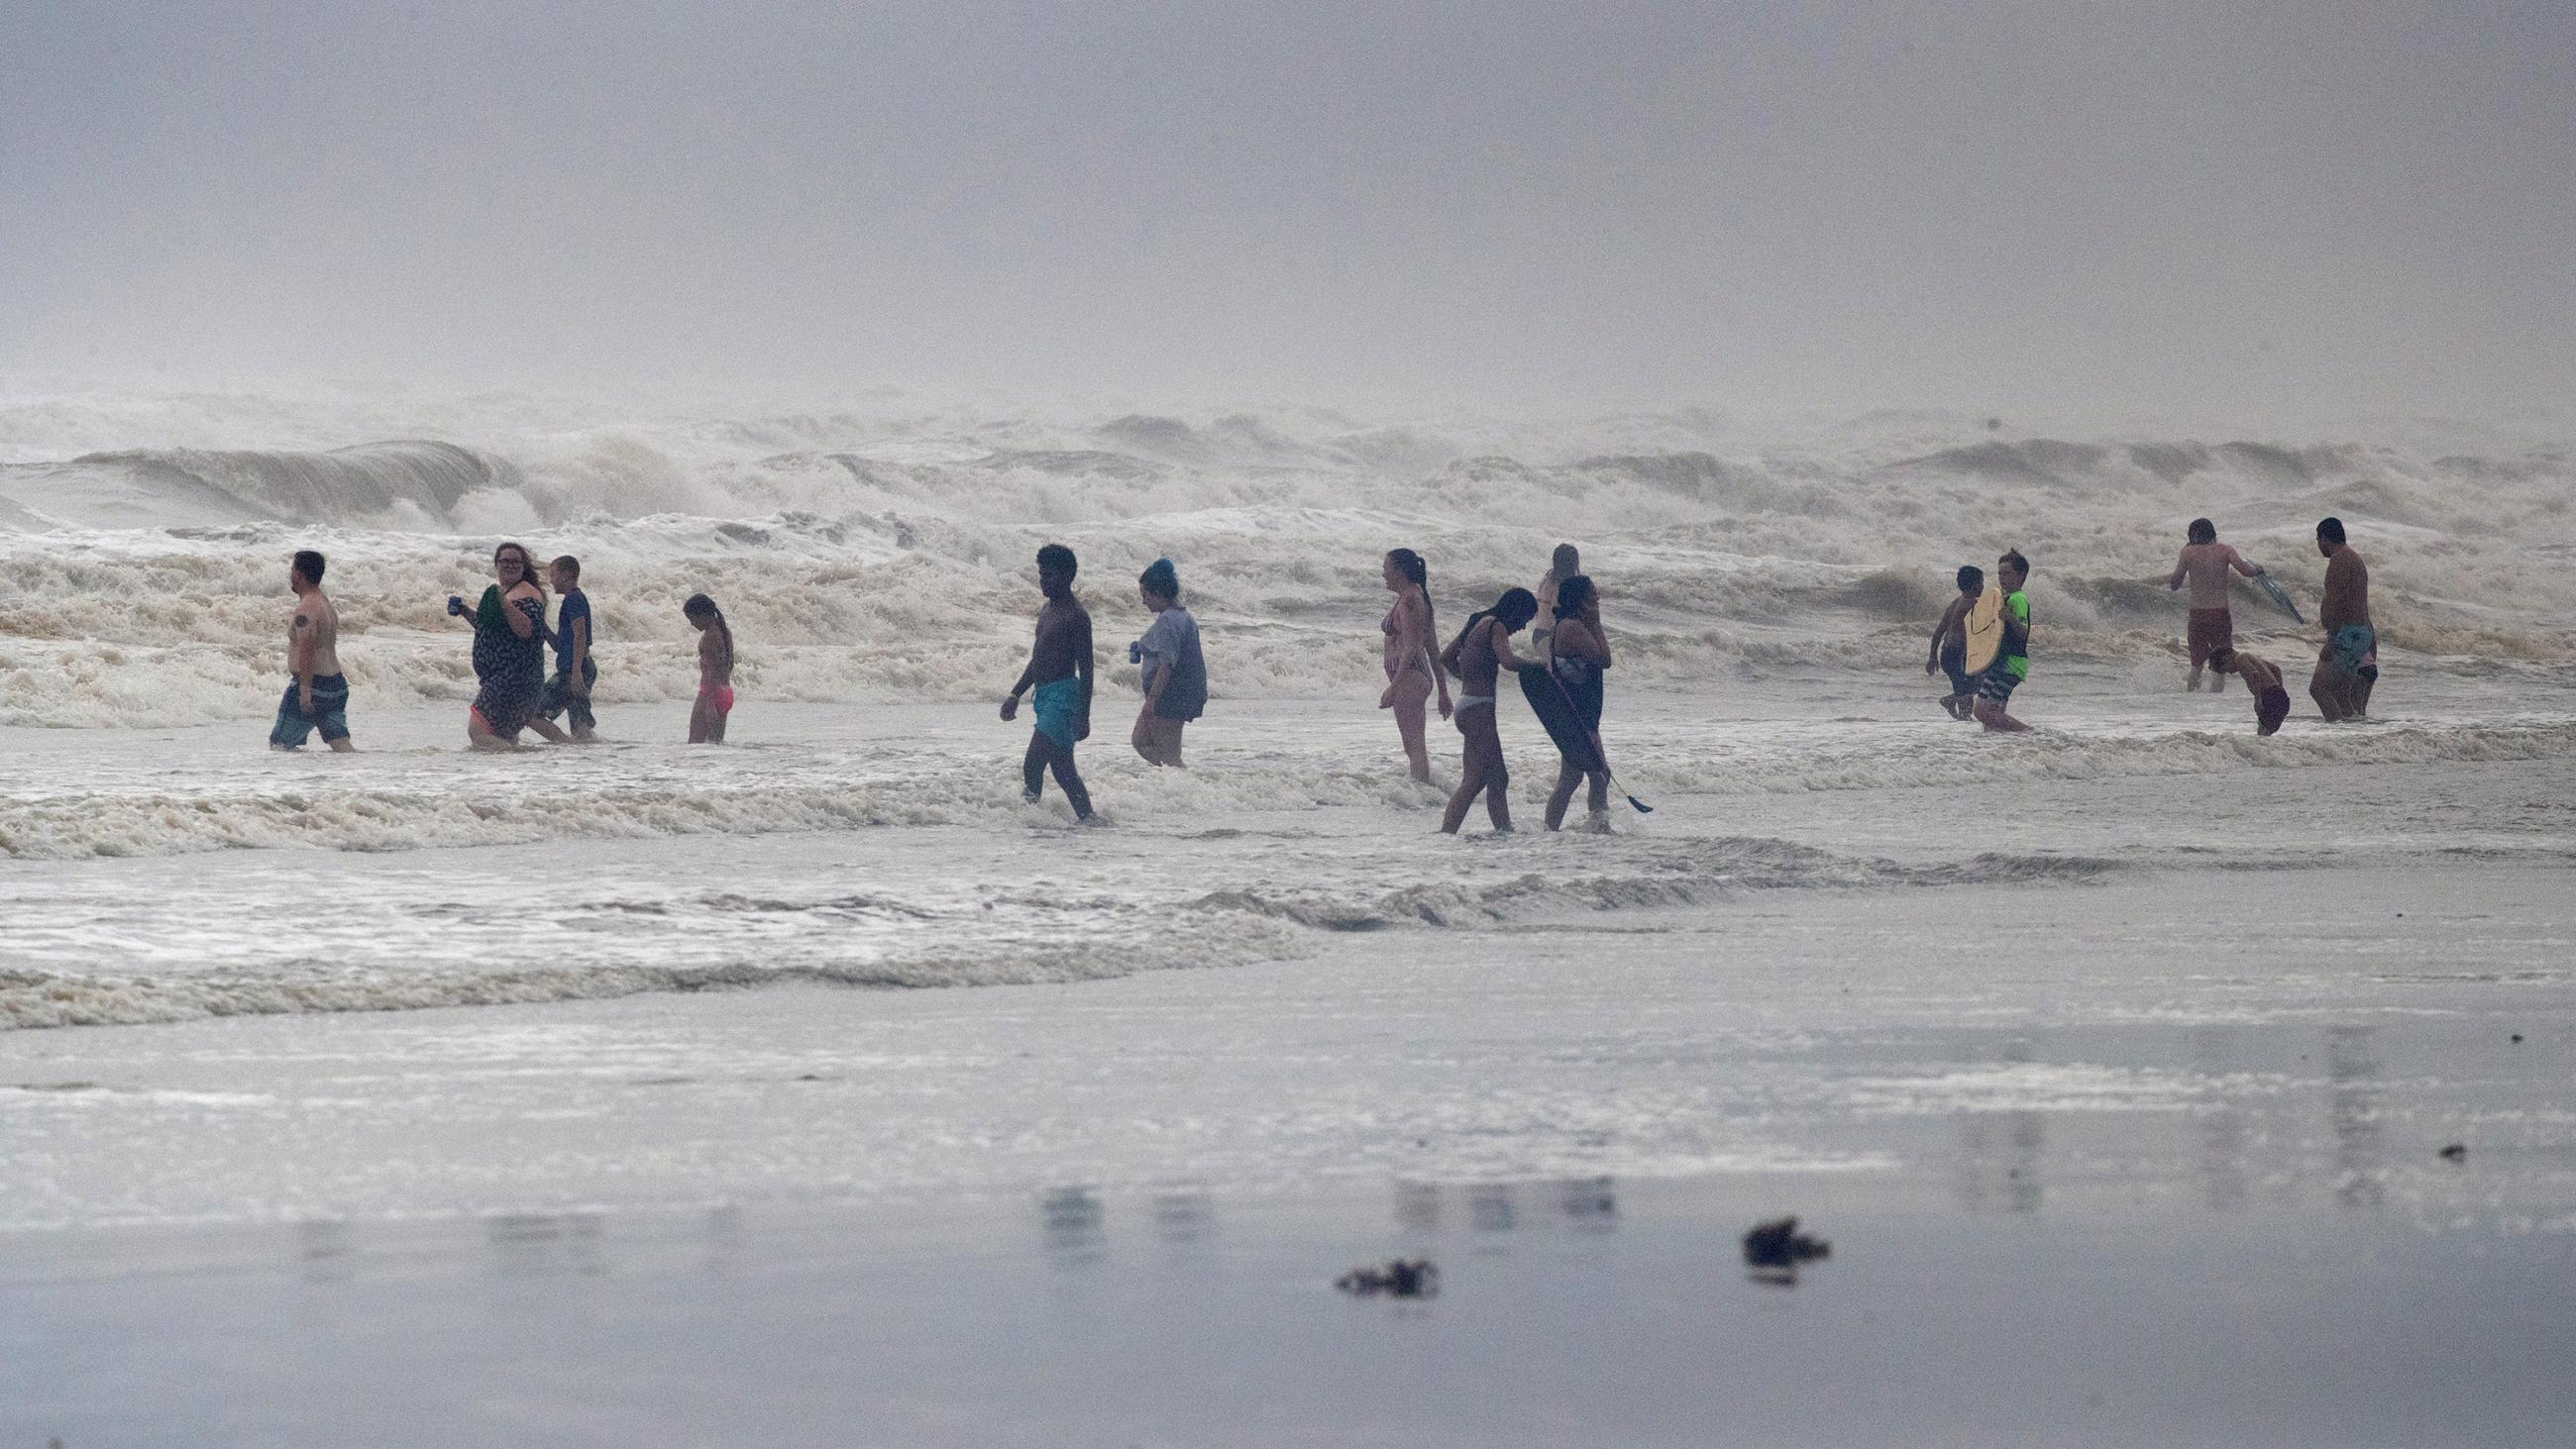 The photo shows a number of people on a beach amid huge waves. 